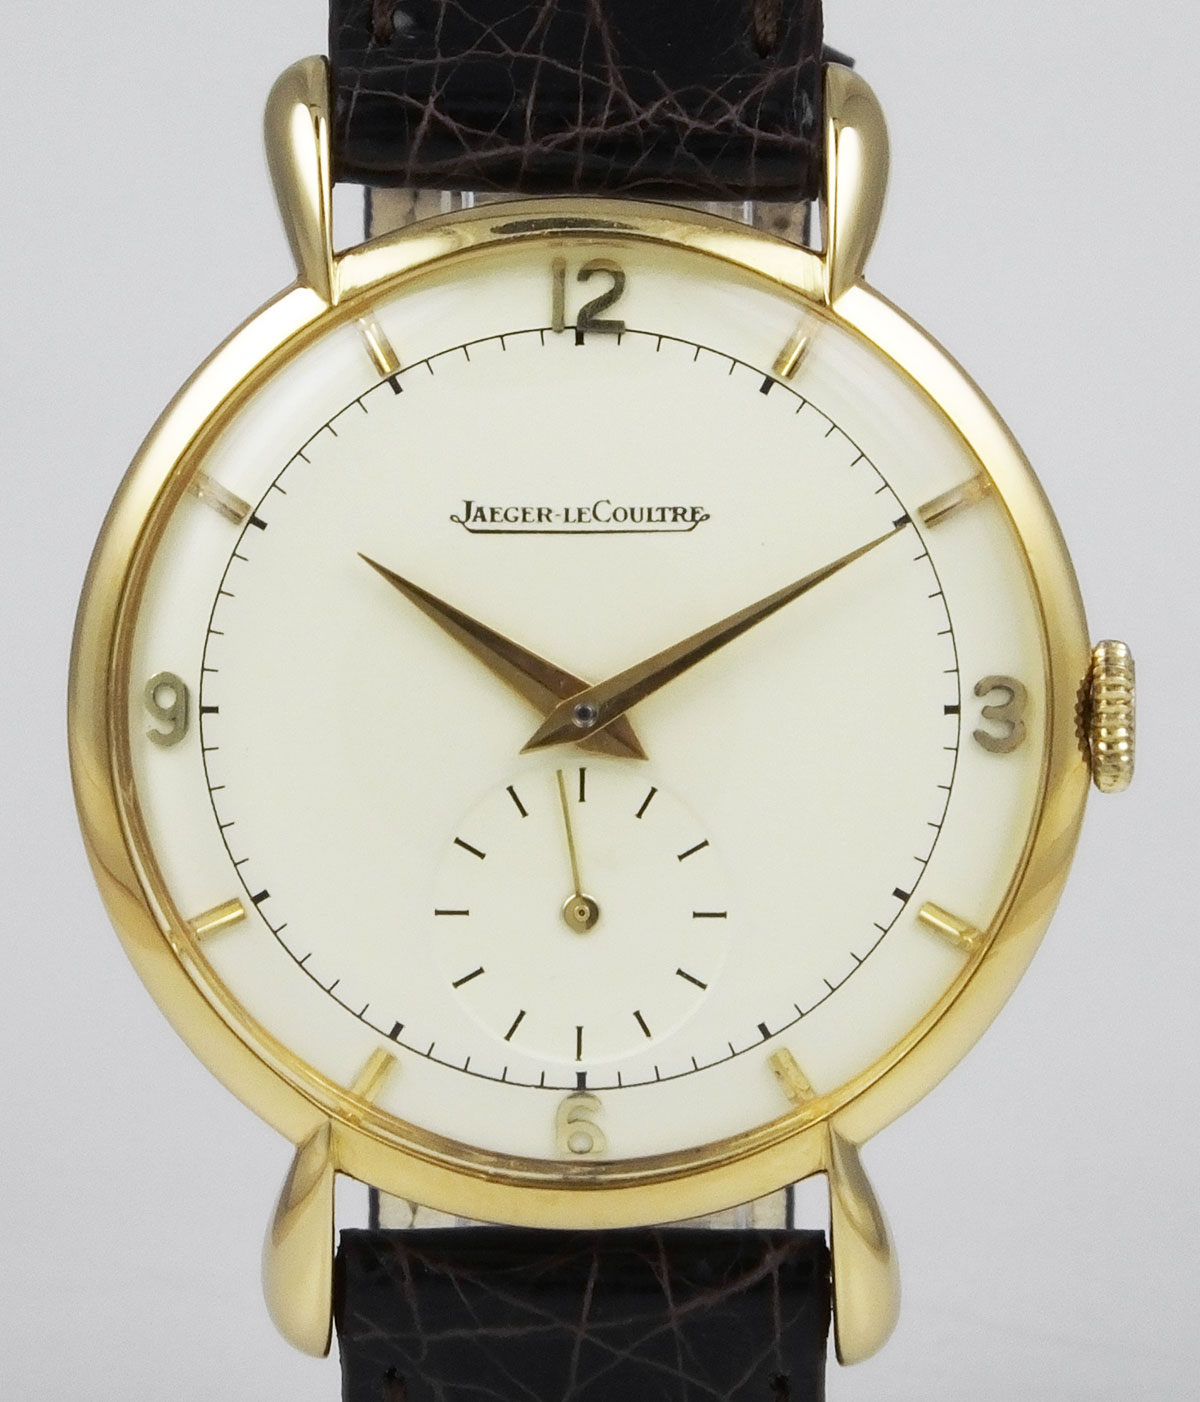 Jaeger LeCoultre In 18K Solid Gold Case With Fancy Lugs - White Sub ...